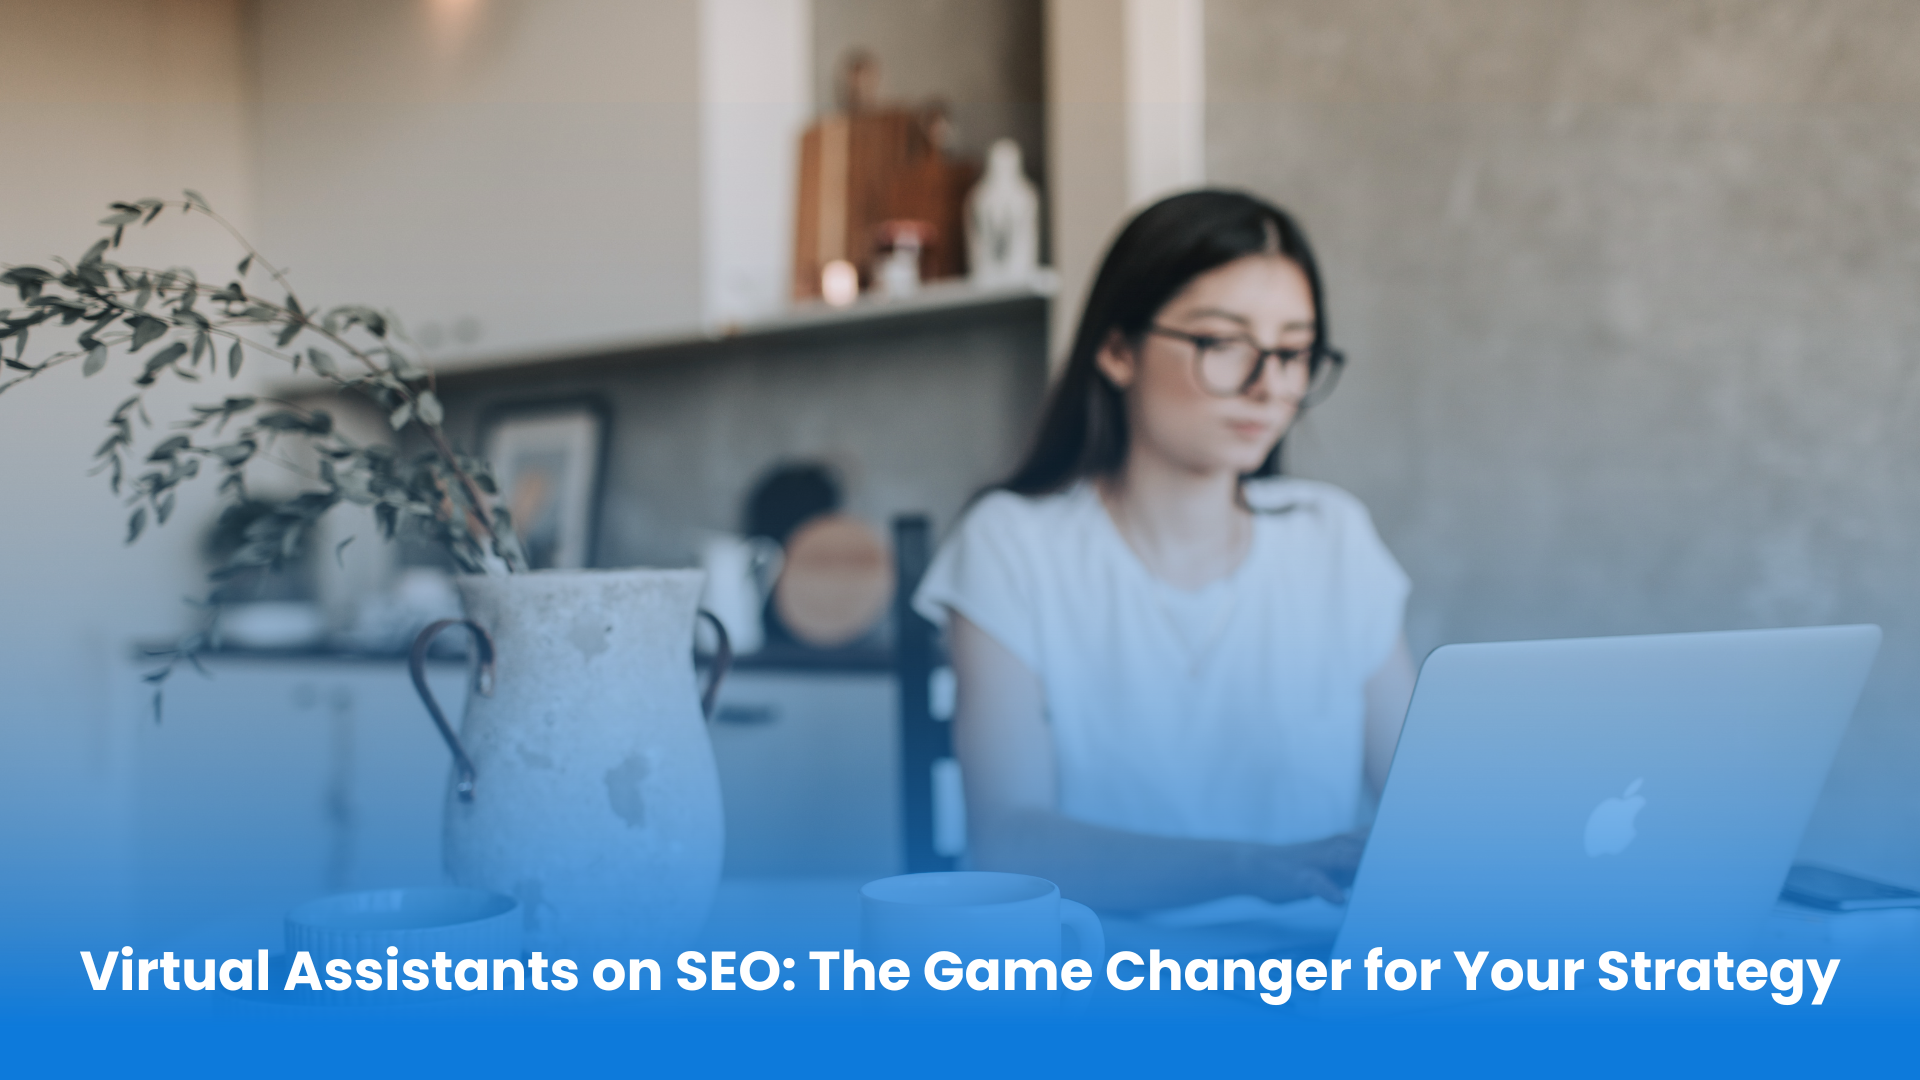 Virtual assistants are the game changer for your SEO strategy.